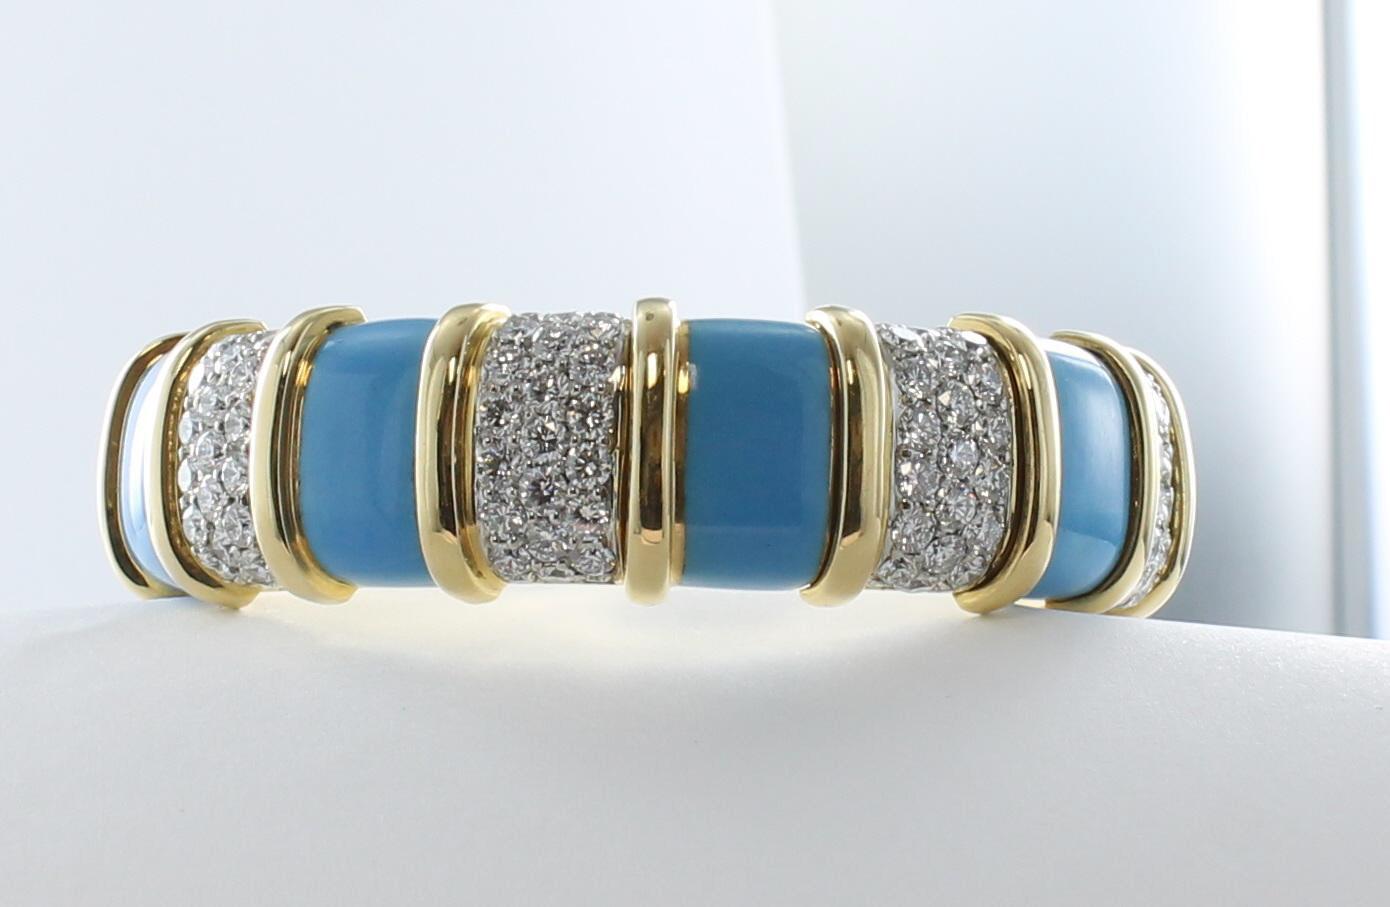 Tiffany & Co. Turquoise Paillone Enamel and Diamond Schlumberger Bracelet containing 20.0 carat of diamonds set in Platinum and 18 karat yellow gold.
27 rows of brilliant diamonds equals 207 stones. Perfectly matched in color and clarity as you